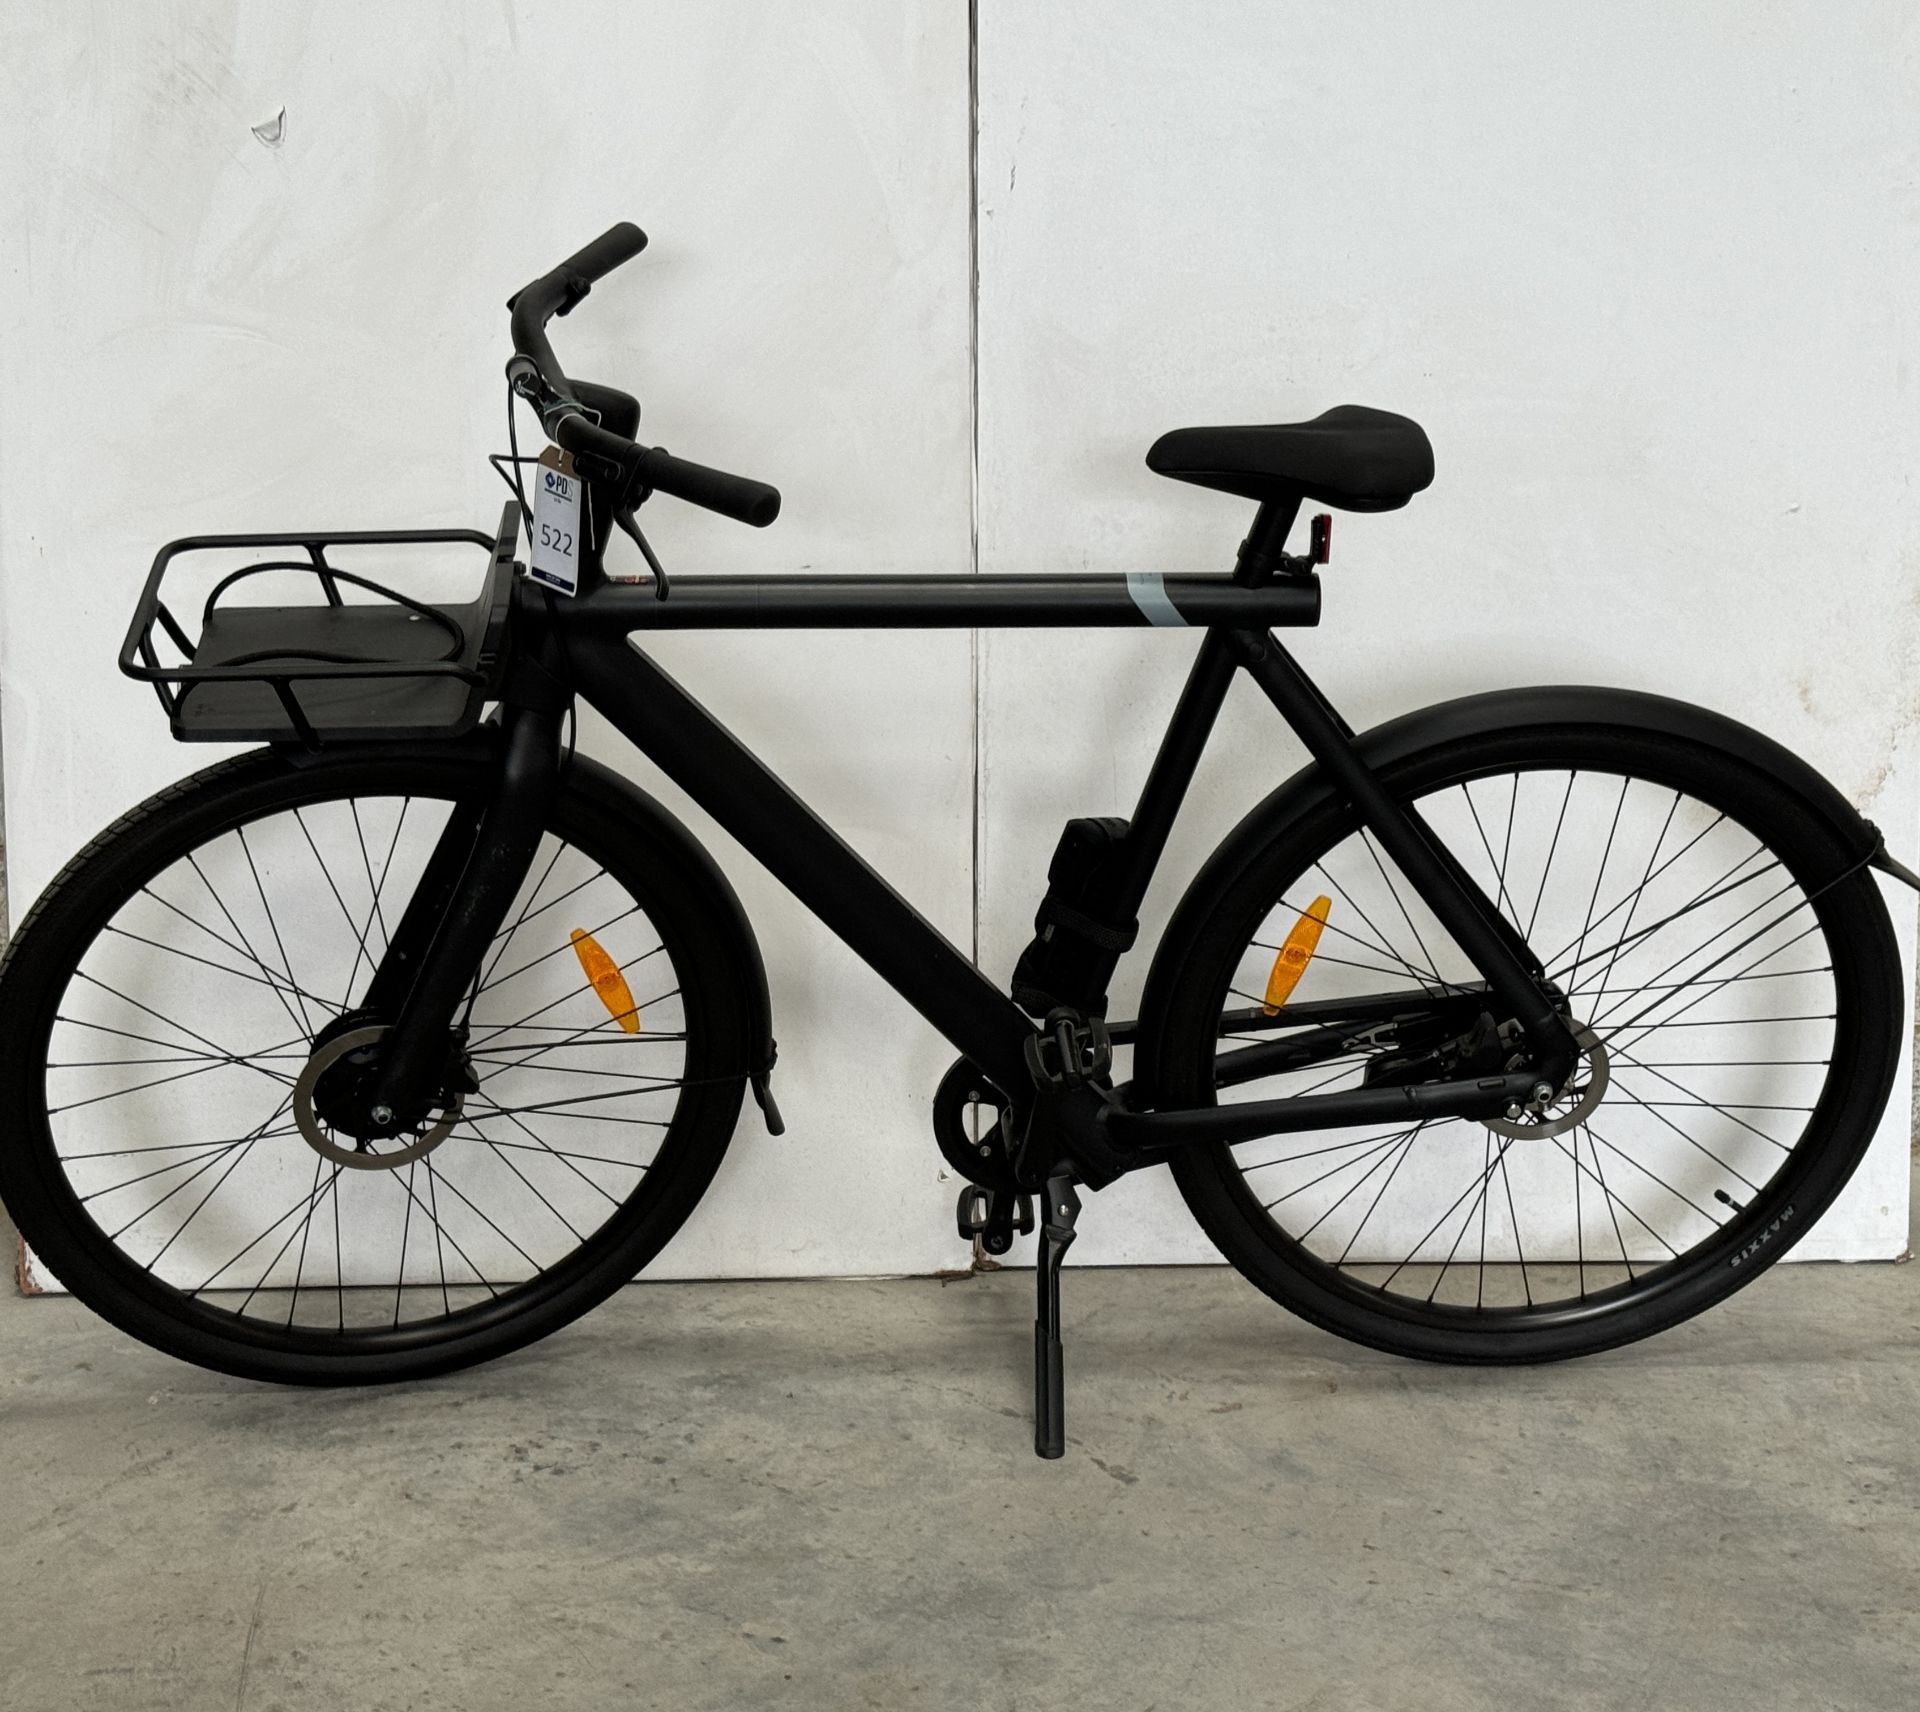 VanMoof S3 Electric Bike, Frame Number ASY3107519 (NOT ROADWORTHY - FOR SPARES ONLY) (No codes